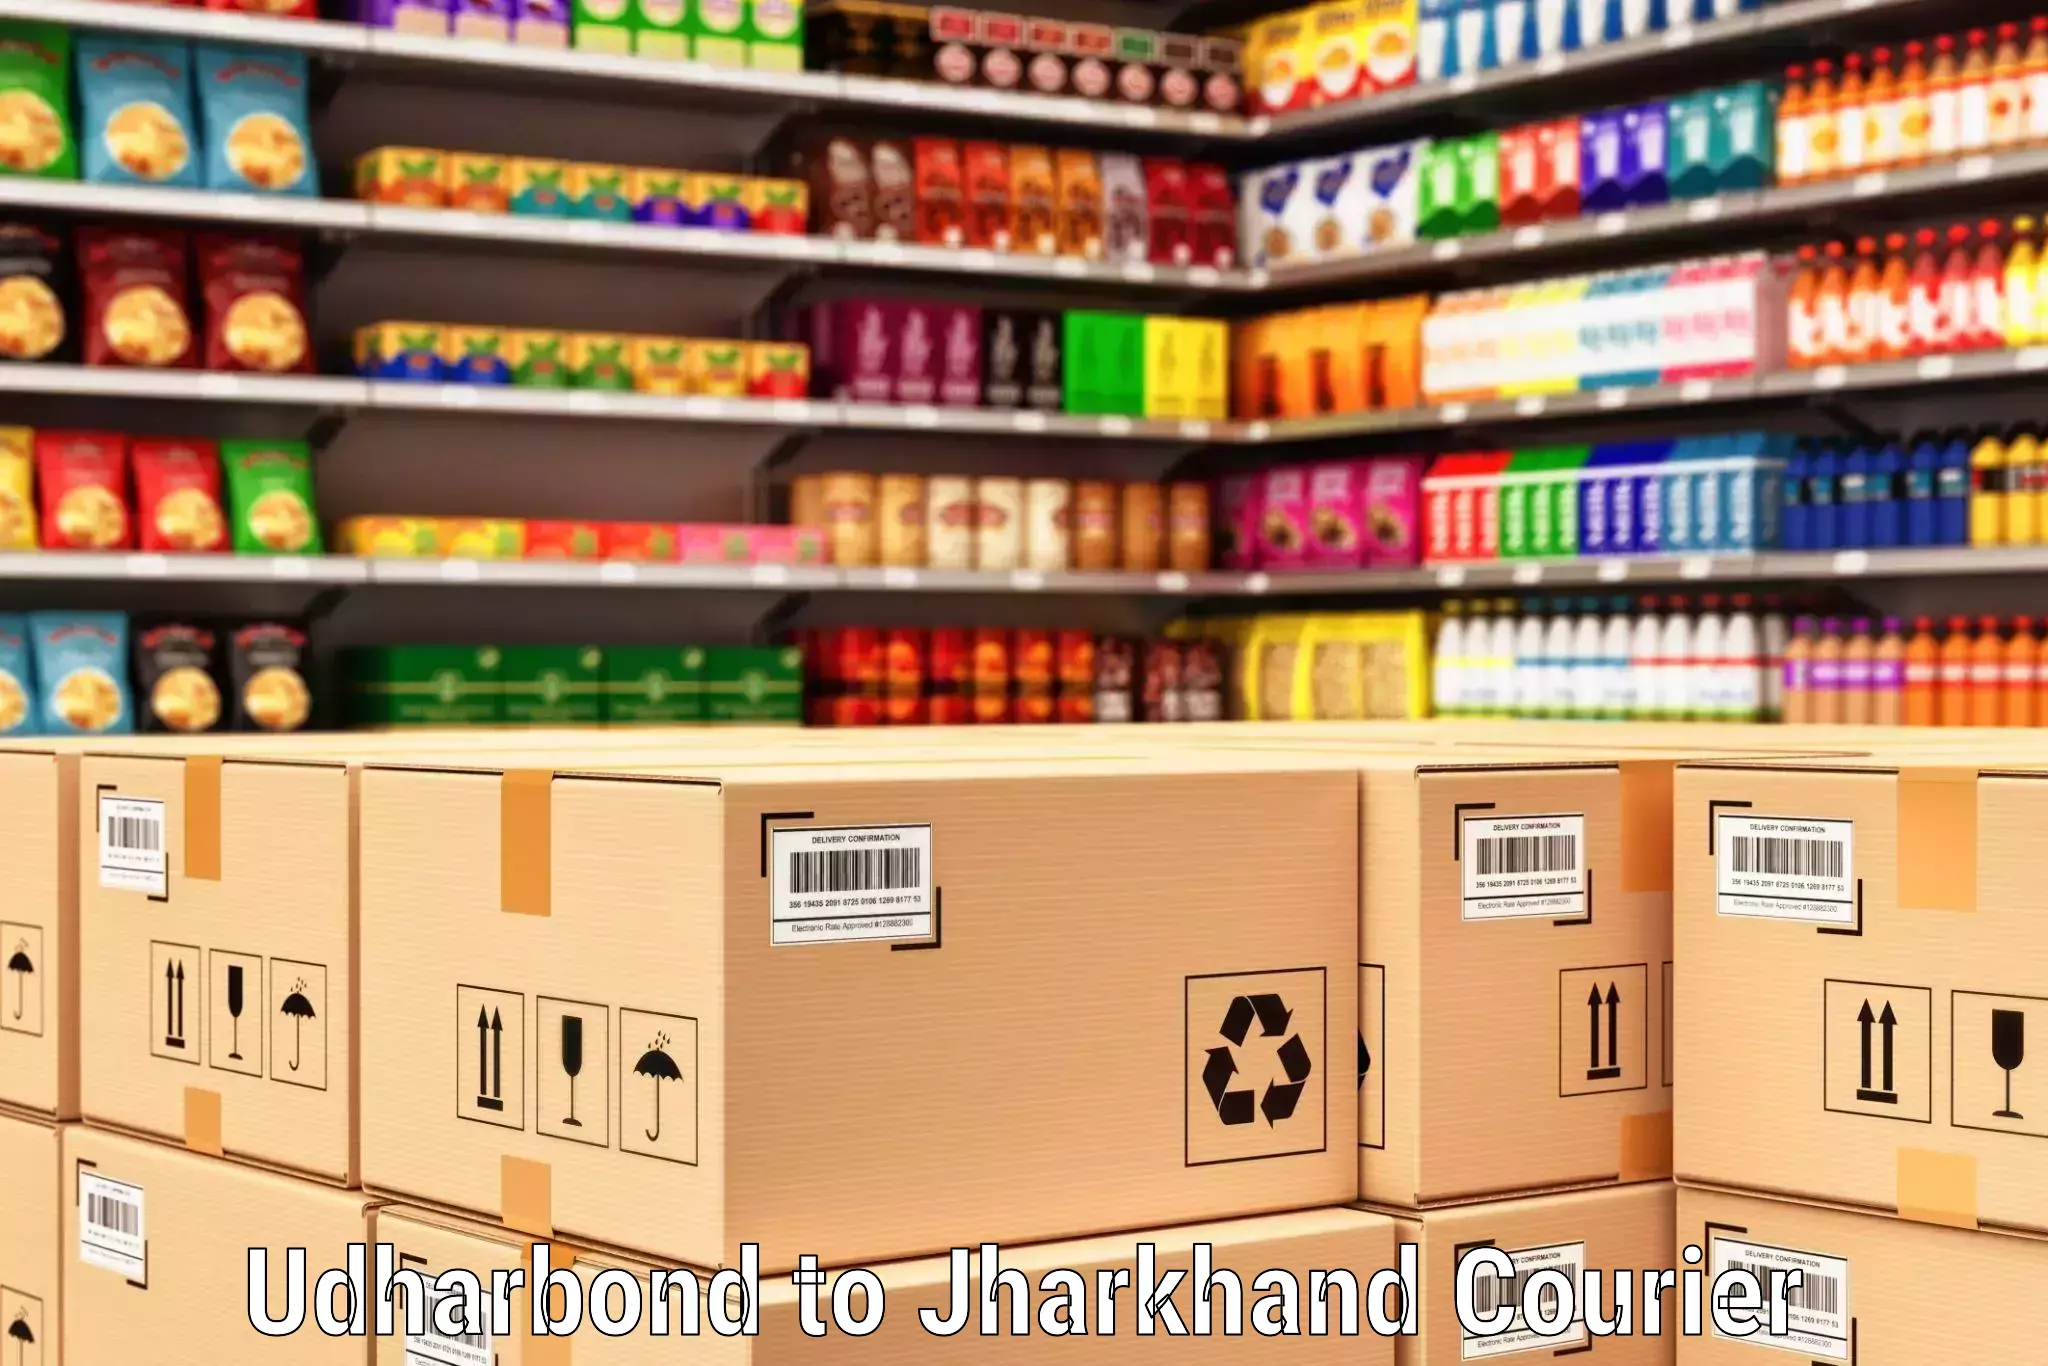 Smart shipping technology Udharbond to Jharkhand